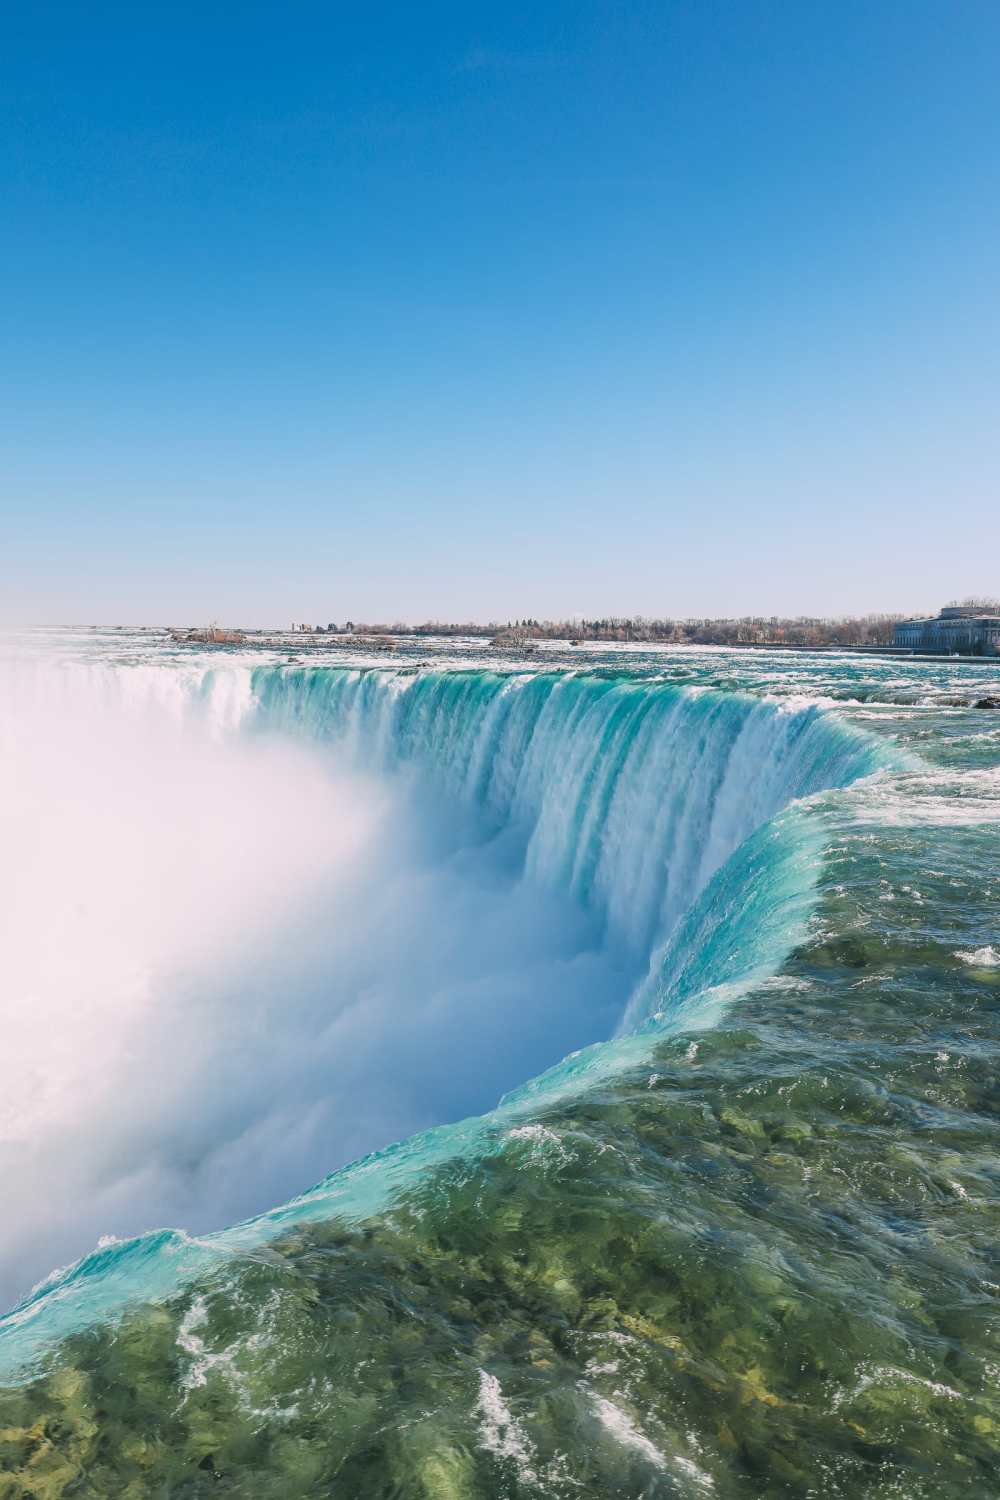 This Is An Amazing Way To Experience Niagara Falls! (16)